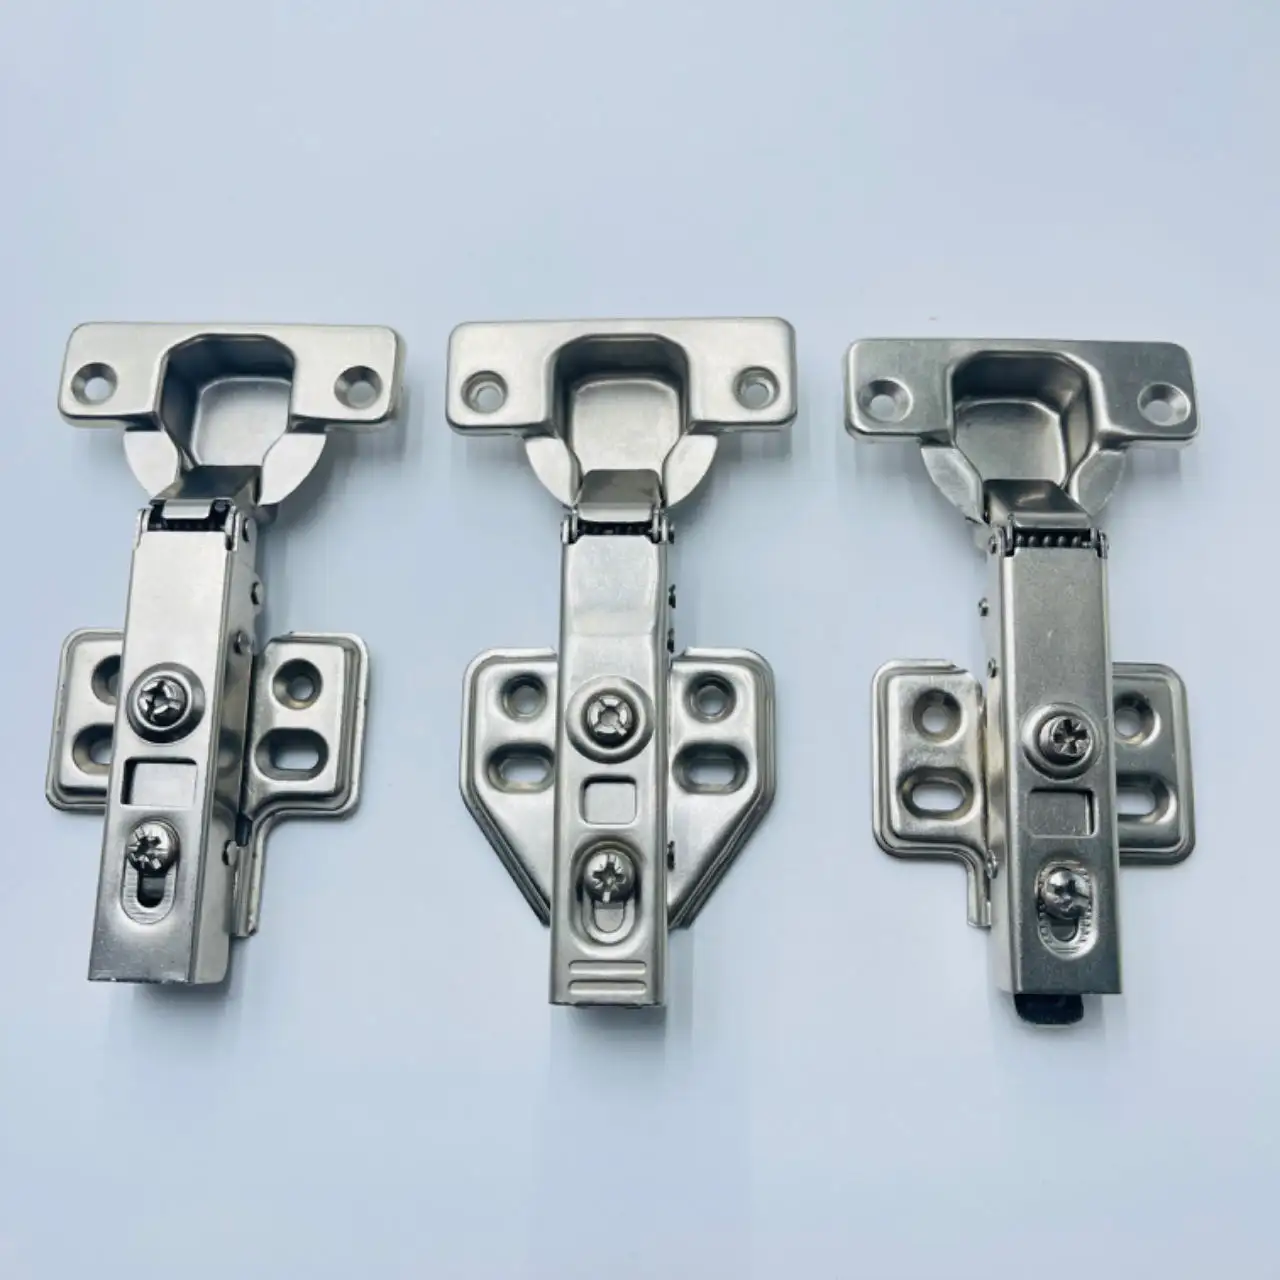 Wholesale Nickel Plated Hydraulic Full Overlay Soft Close Furniture Hinges For Kitchen Cabinets